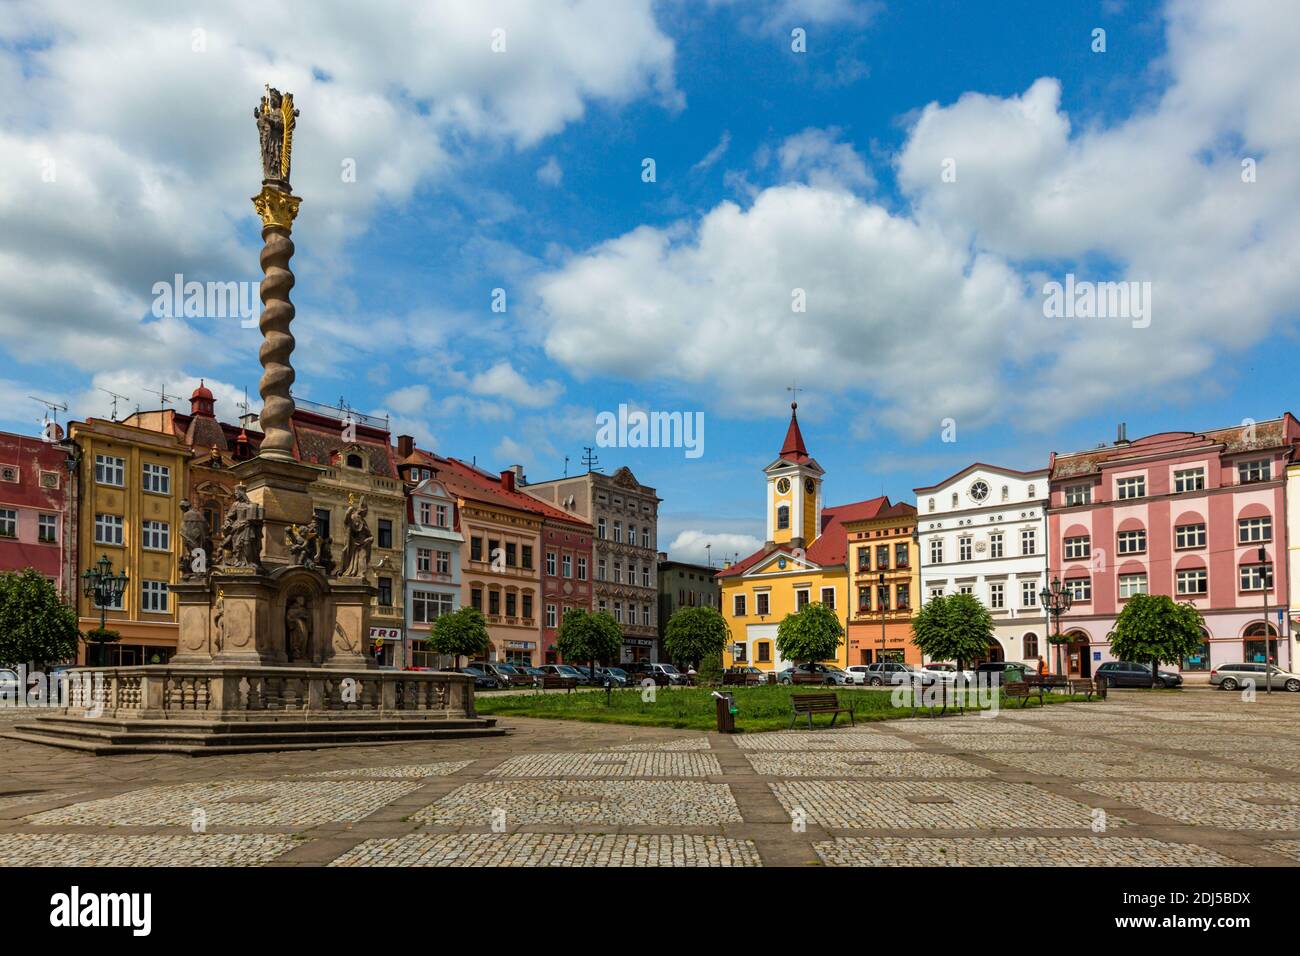 Broumov, Czech Republic - June 17 2020: View of the town square with town hall, colourful houses, green lawn, trees and the Marian column with statues. Stock Photo